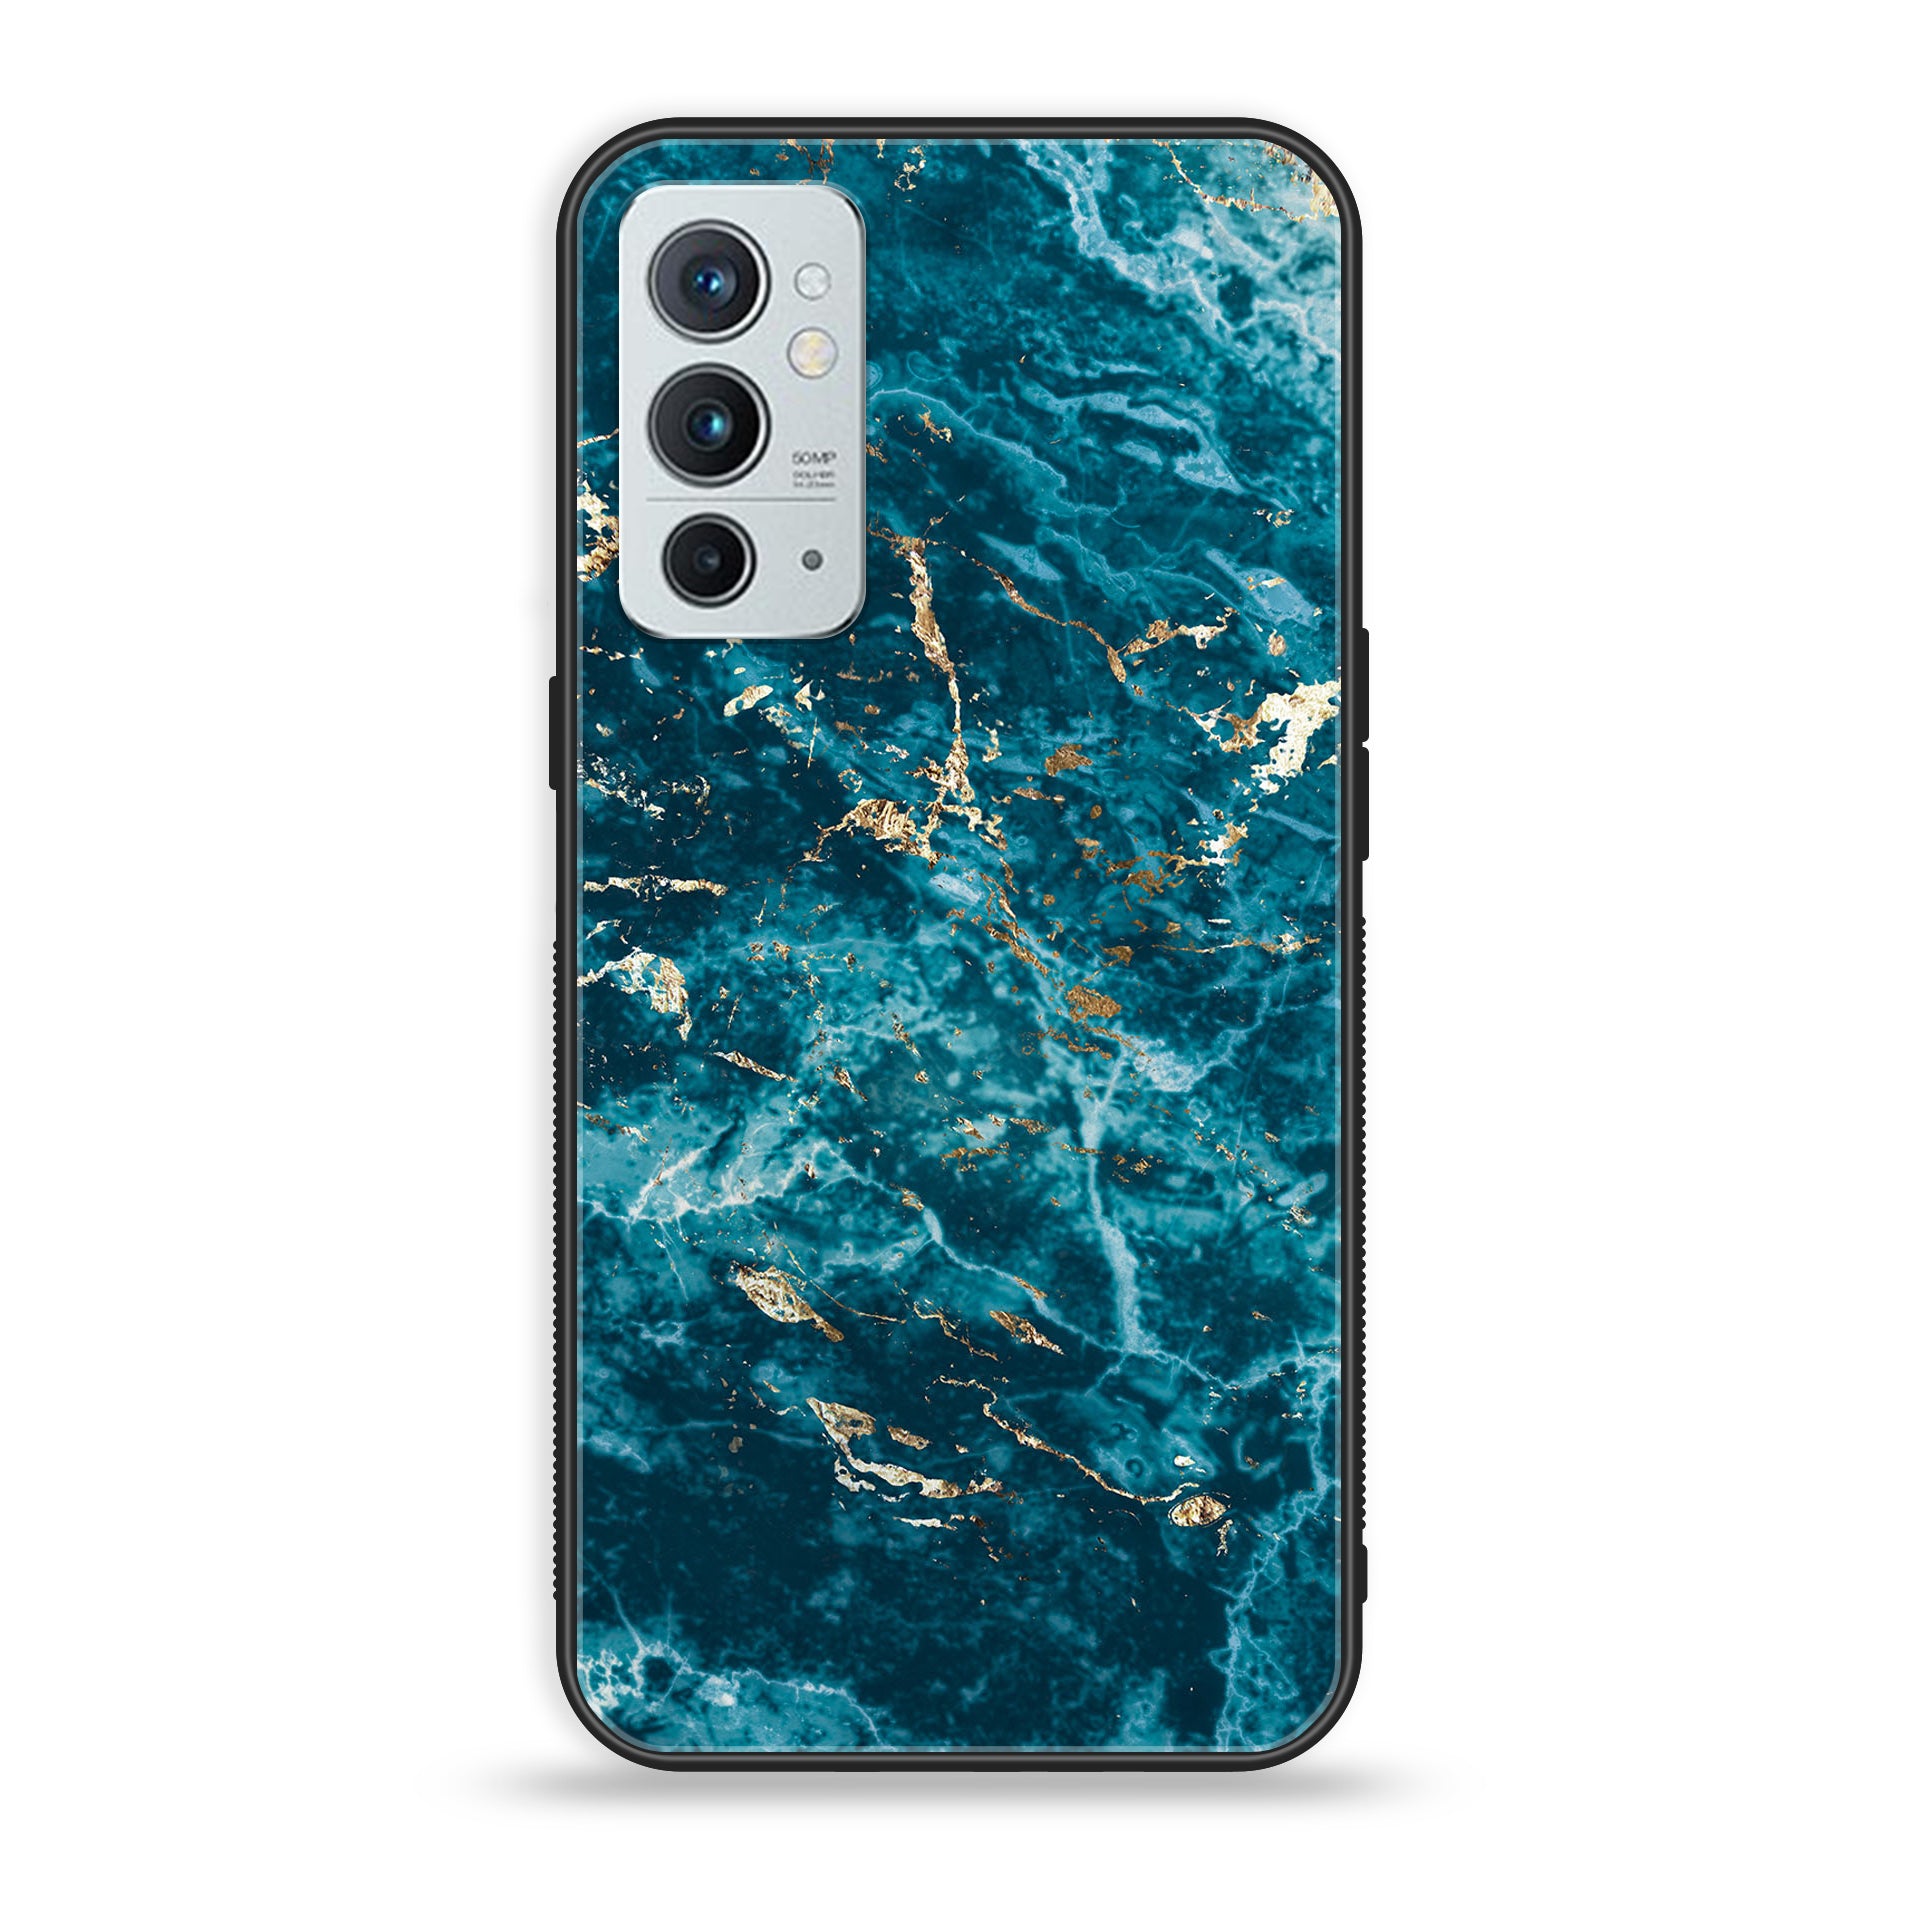 OnePlus 9RT 5G - Blue Marble Series V 2.0 - Premium Printed Glass soft Bumper shock Proof Case